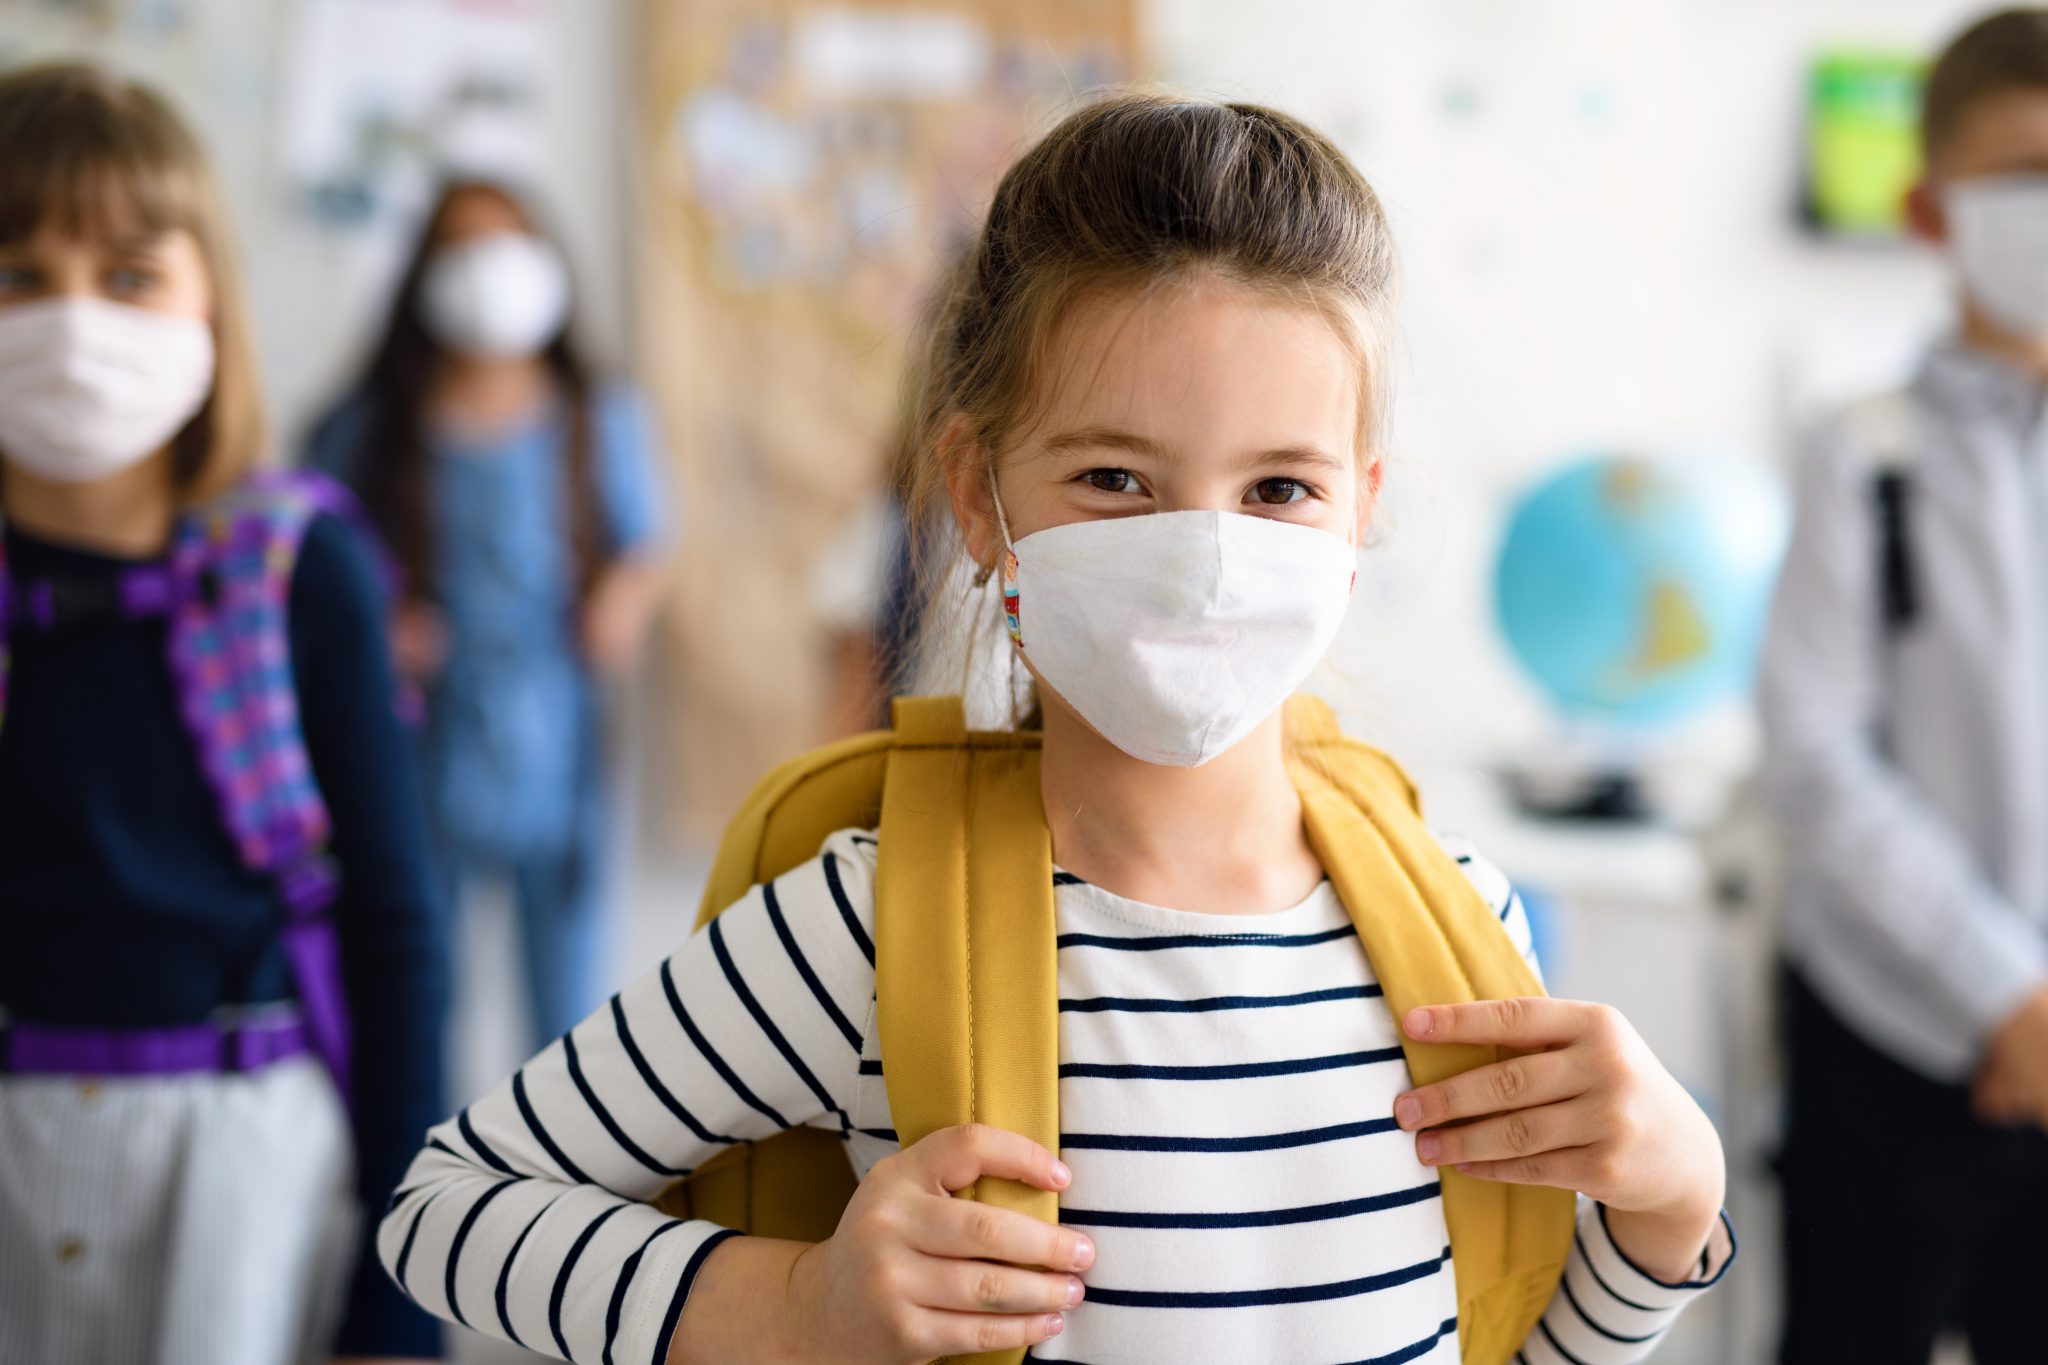 N.J. school district reinstates mask mandate as COVID-19 cases rise